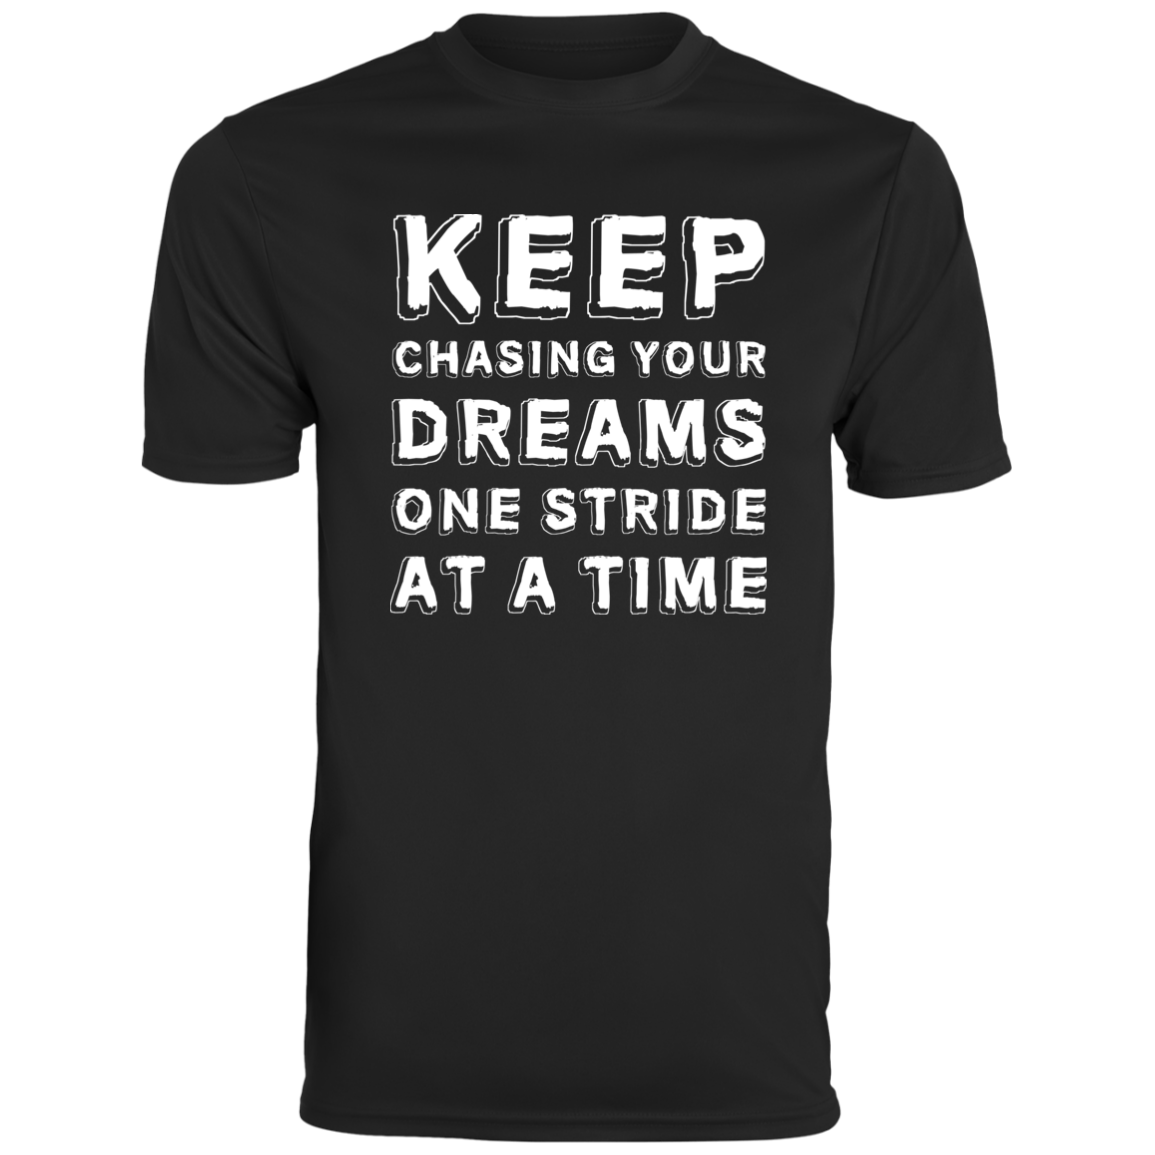 Men's Inspirational Top Keep chasing your dreams, one stride at a time